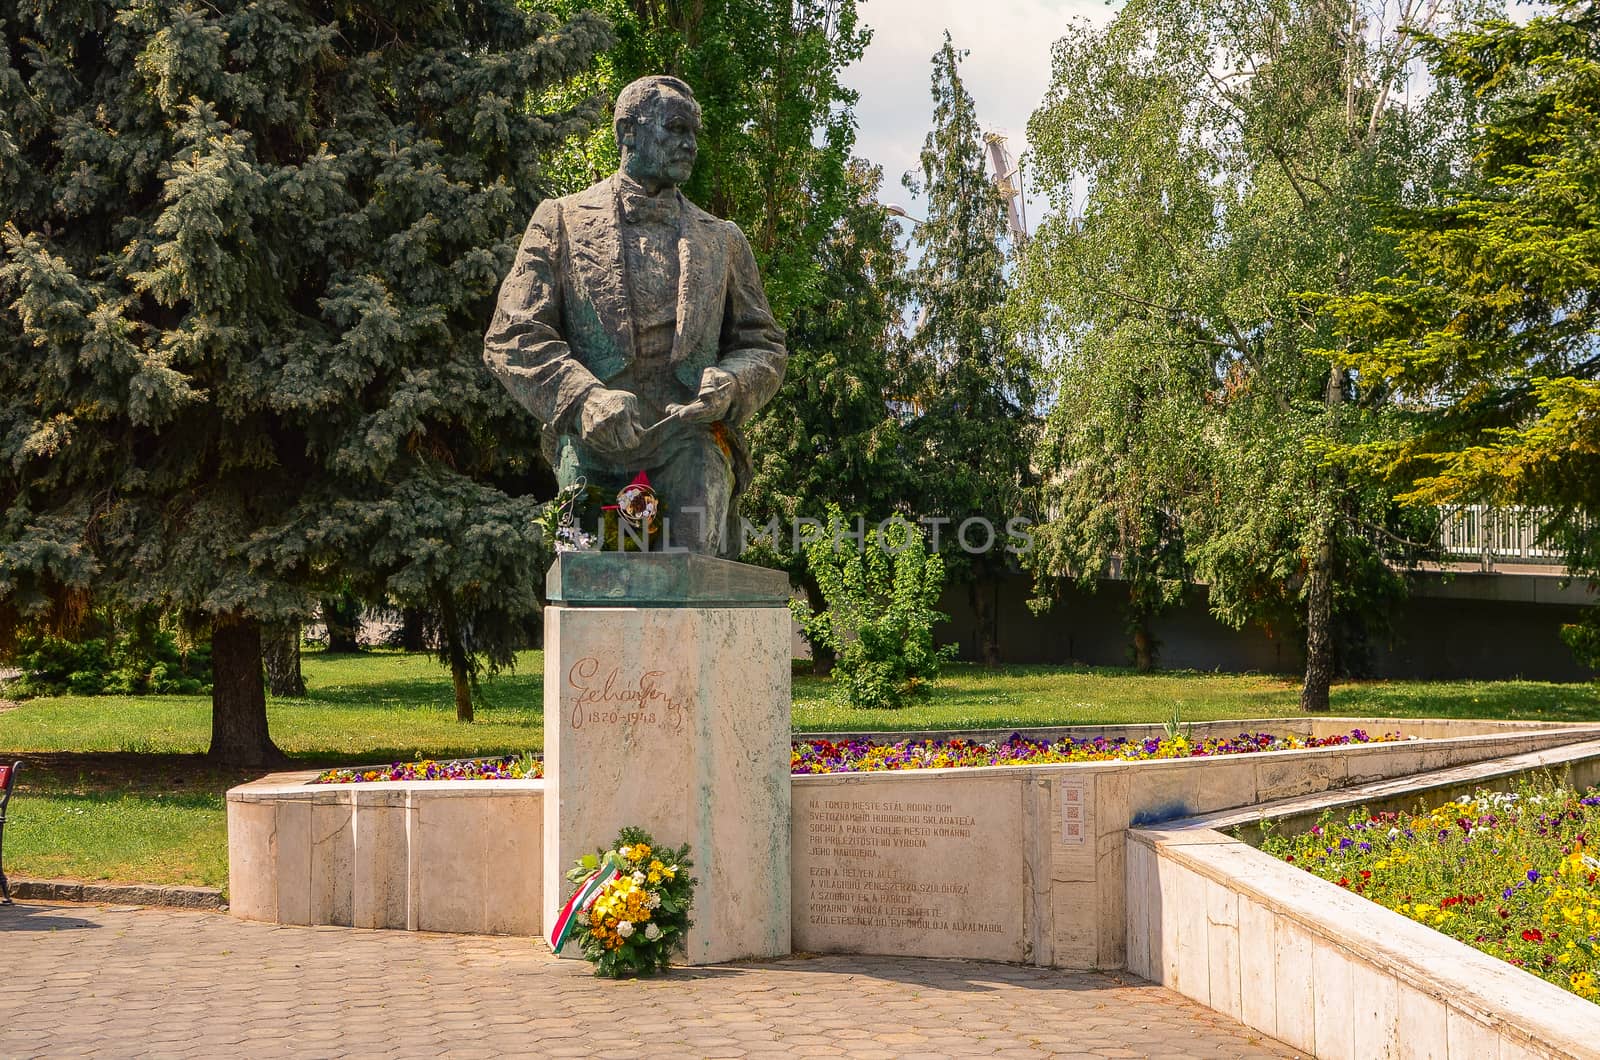 the statue of Franz Lehár in the park of Franz Lehár - famous Austro-Hungarian composer. Komárno, Slovakia by chernobrovin